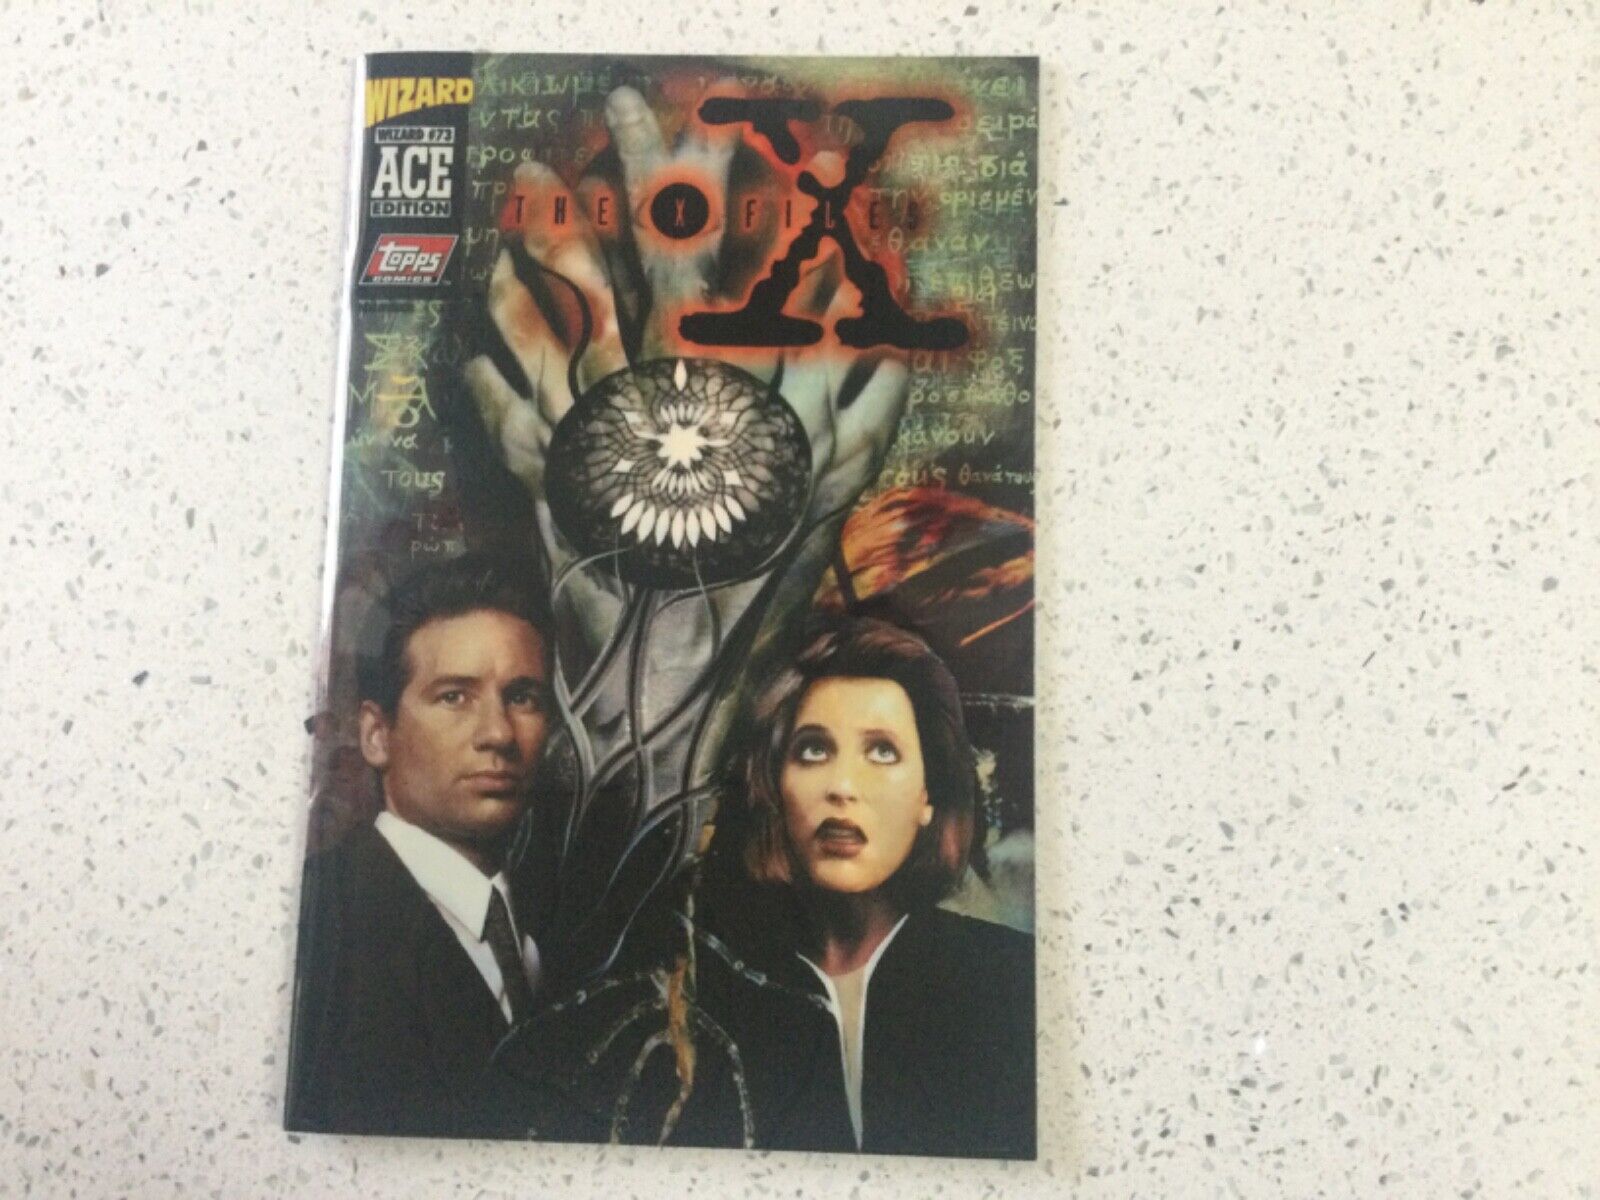 WIZARD Ace Edition #73 / 19, X-FILES #1, NM, Lone Gunman Fox Mulder Scully 1997